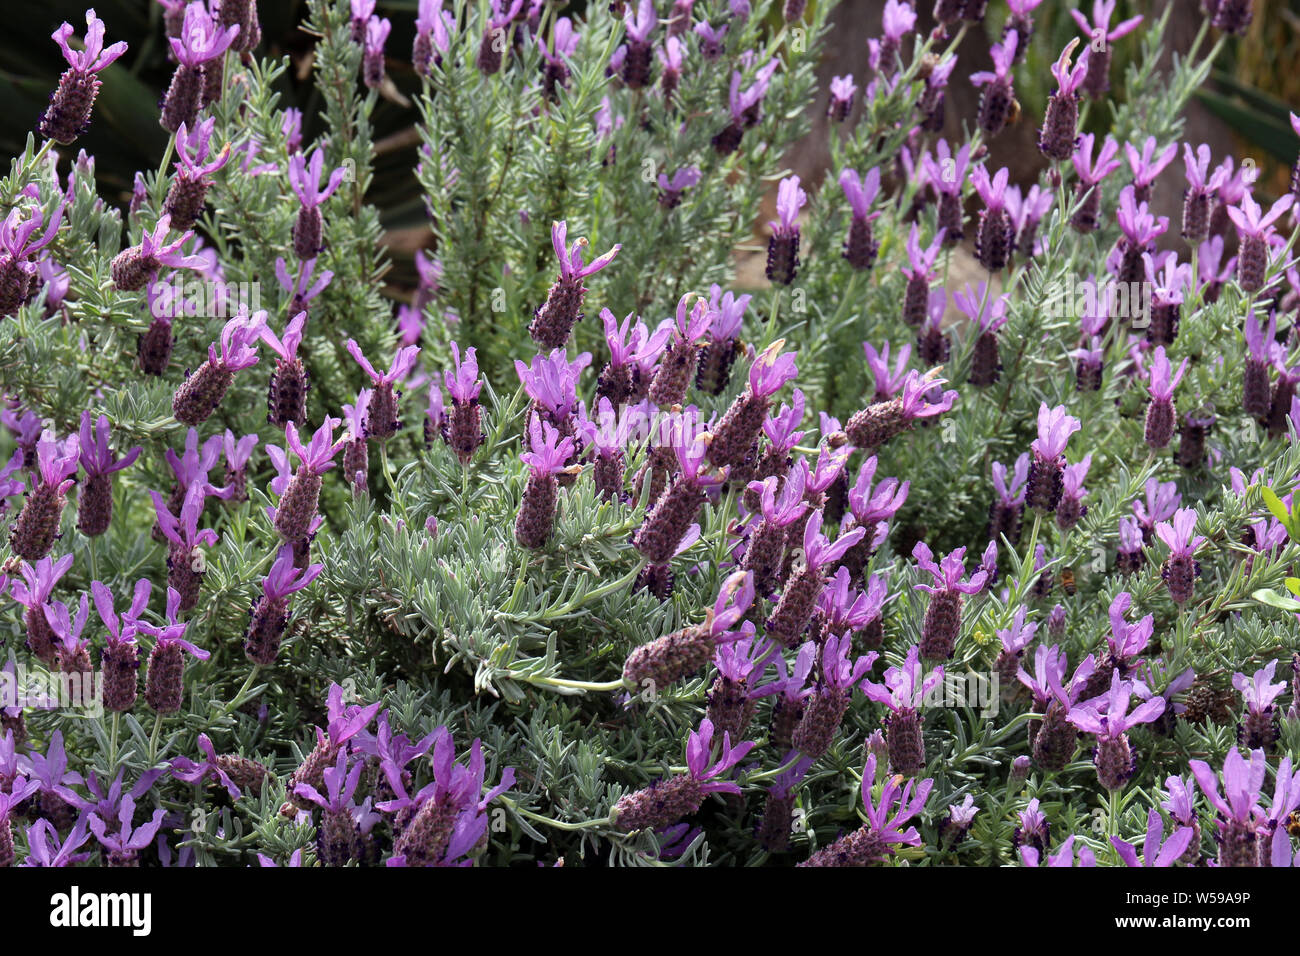 Close up of blooming Lavandula plants with purple flowers Stock Photo